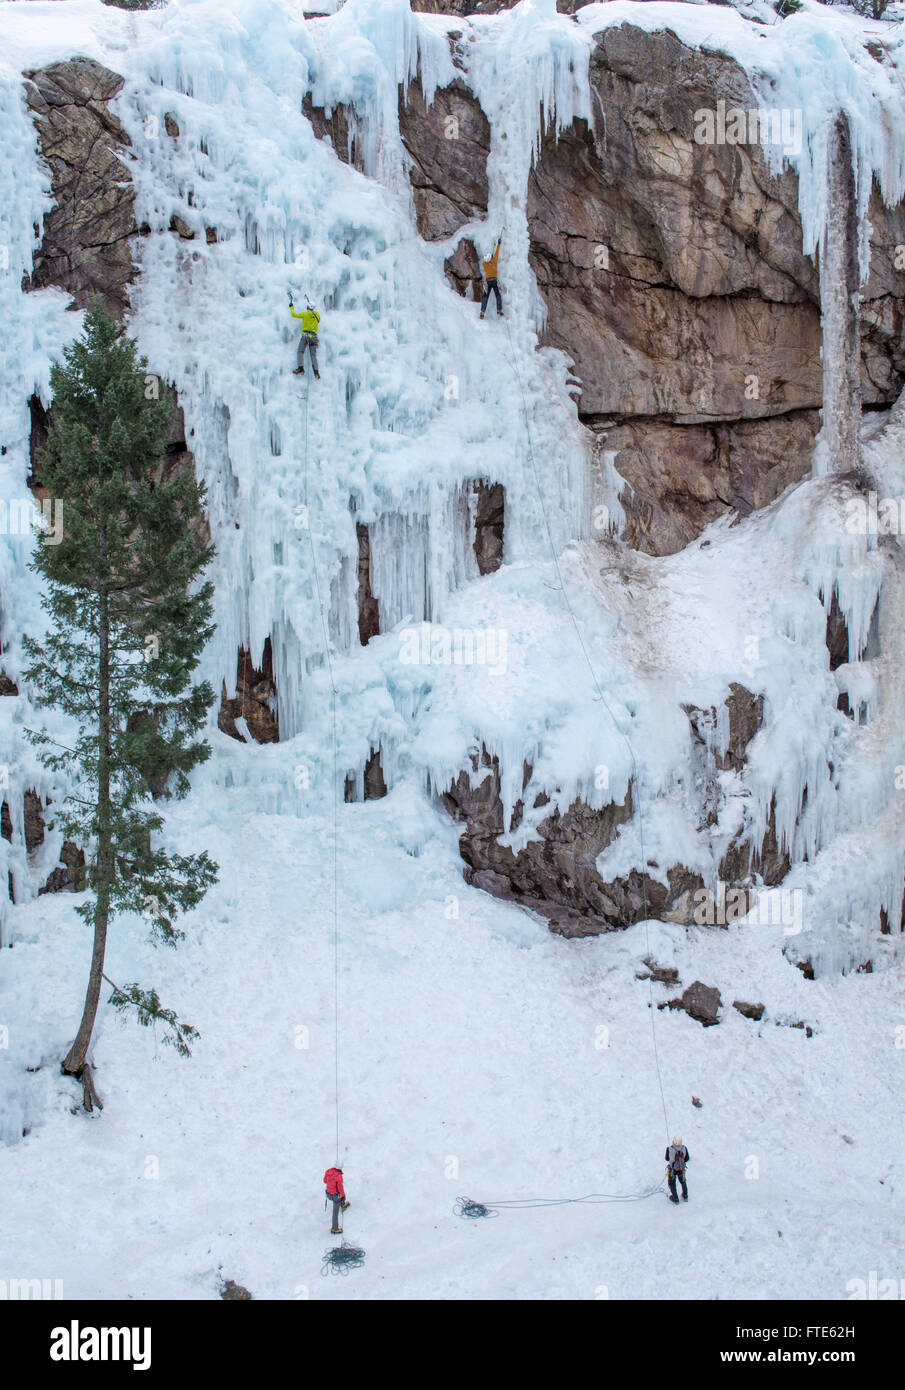 Ice climbers climbing routes called We're Number One and Up Yours rated WI5 in Colorado Stock Photo